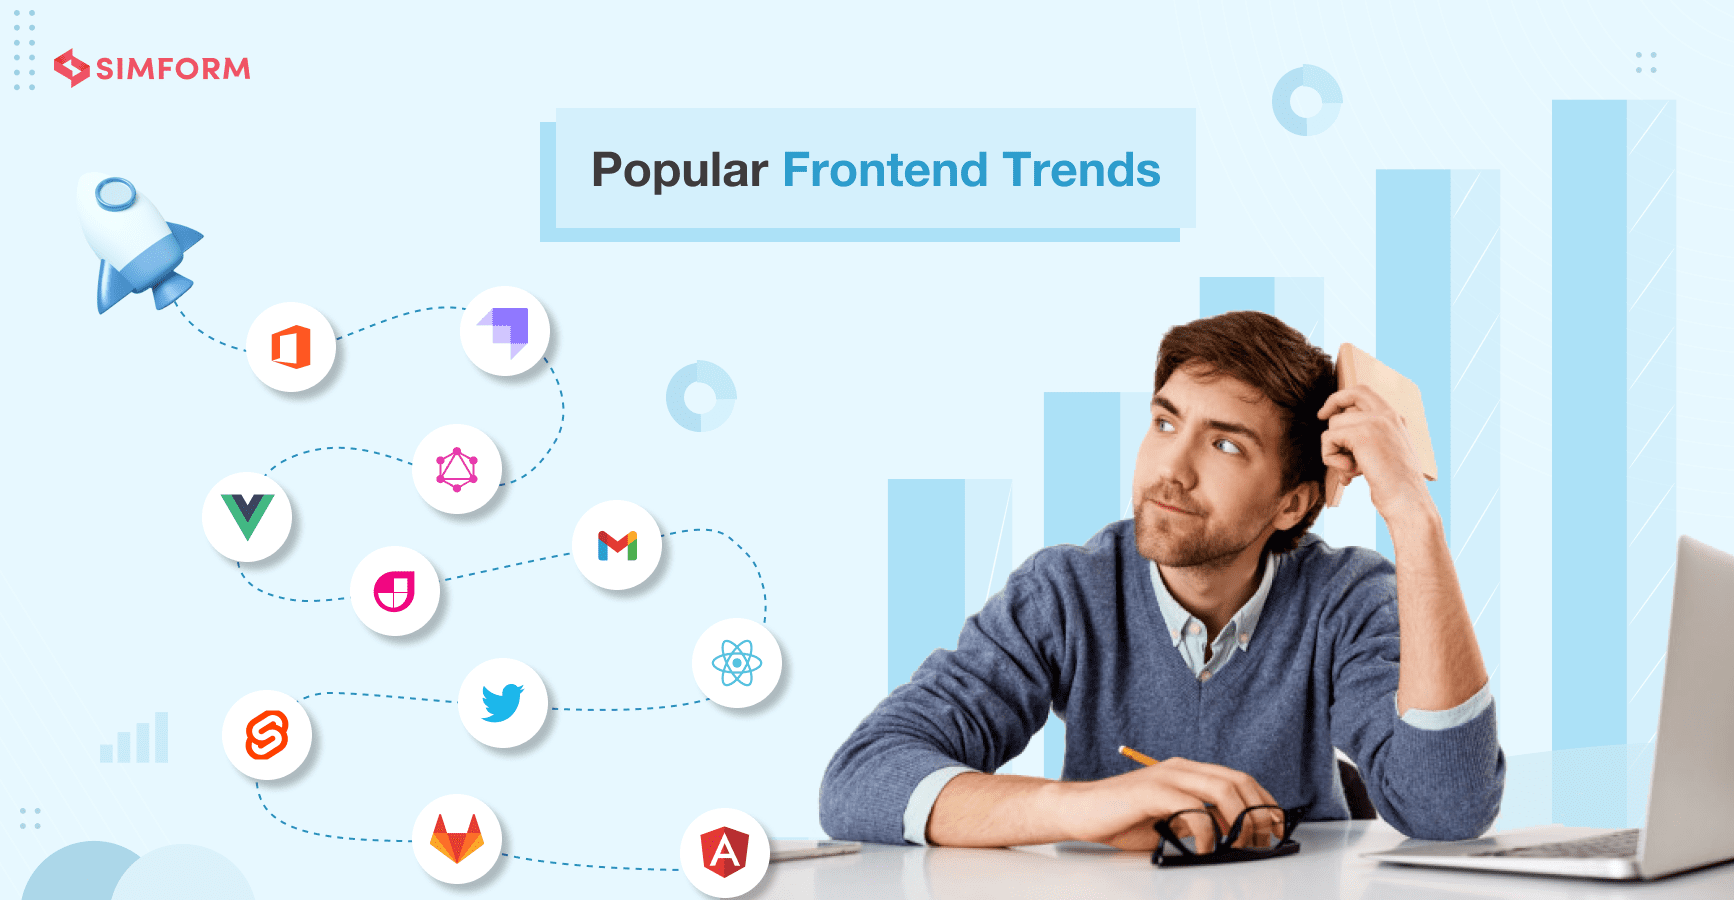 New frontend trends do not pop out of the blue in the software world. The trends become popular when either a prominent organization has adopted it, o